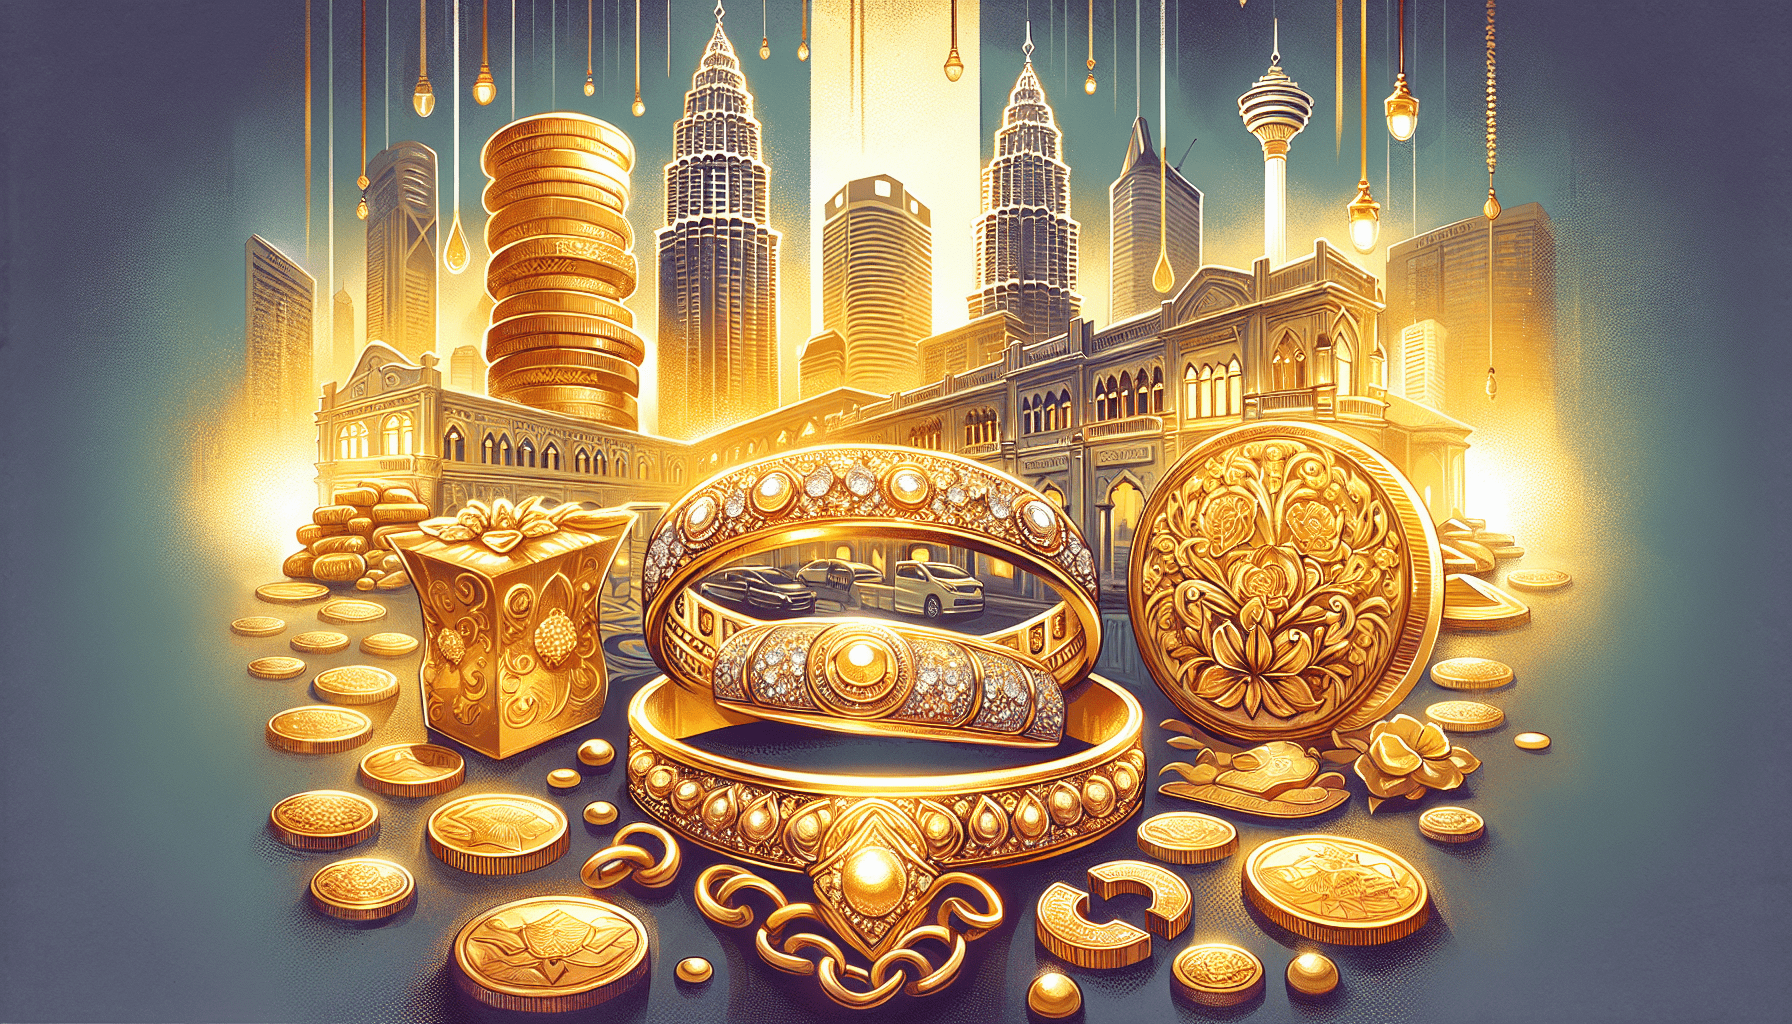 Which Is The Best Gold Shop In Kuala Lumpur?